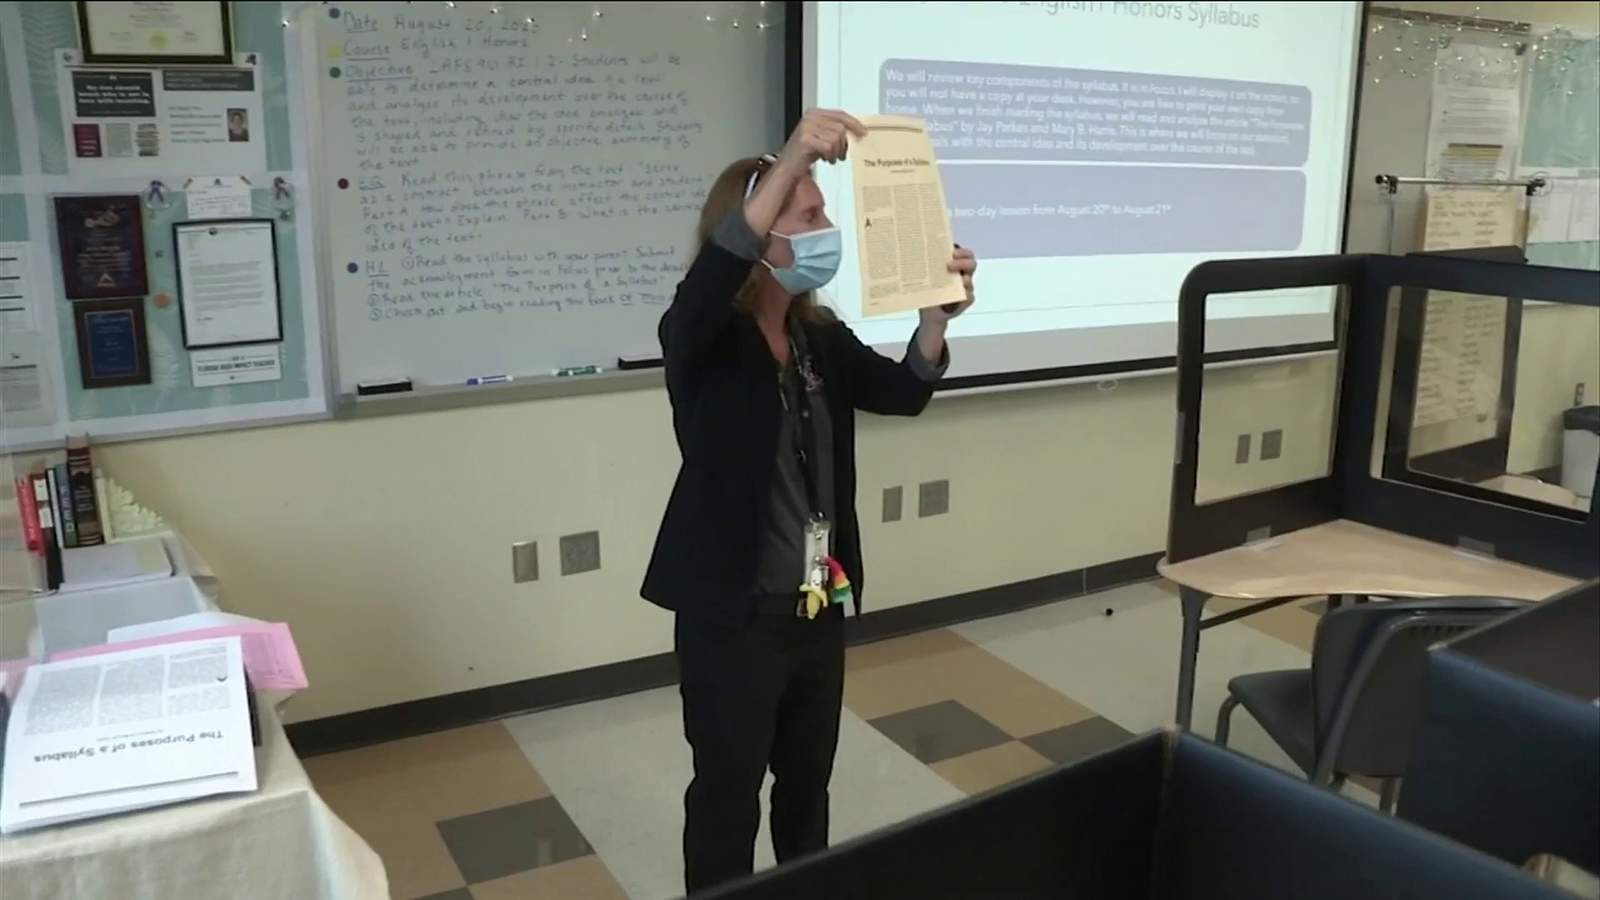 St. Johns County teachers will now need to use sick days for COVID-19 related time off